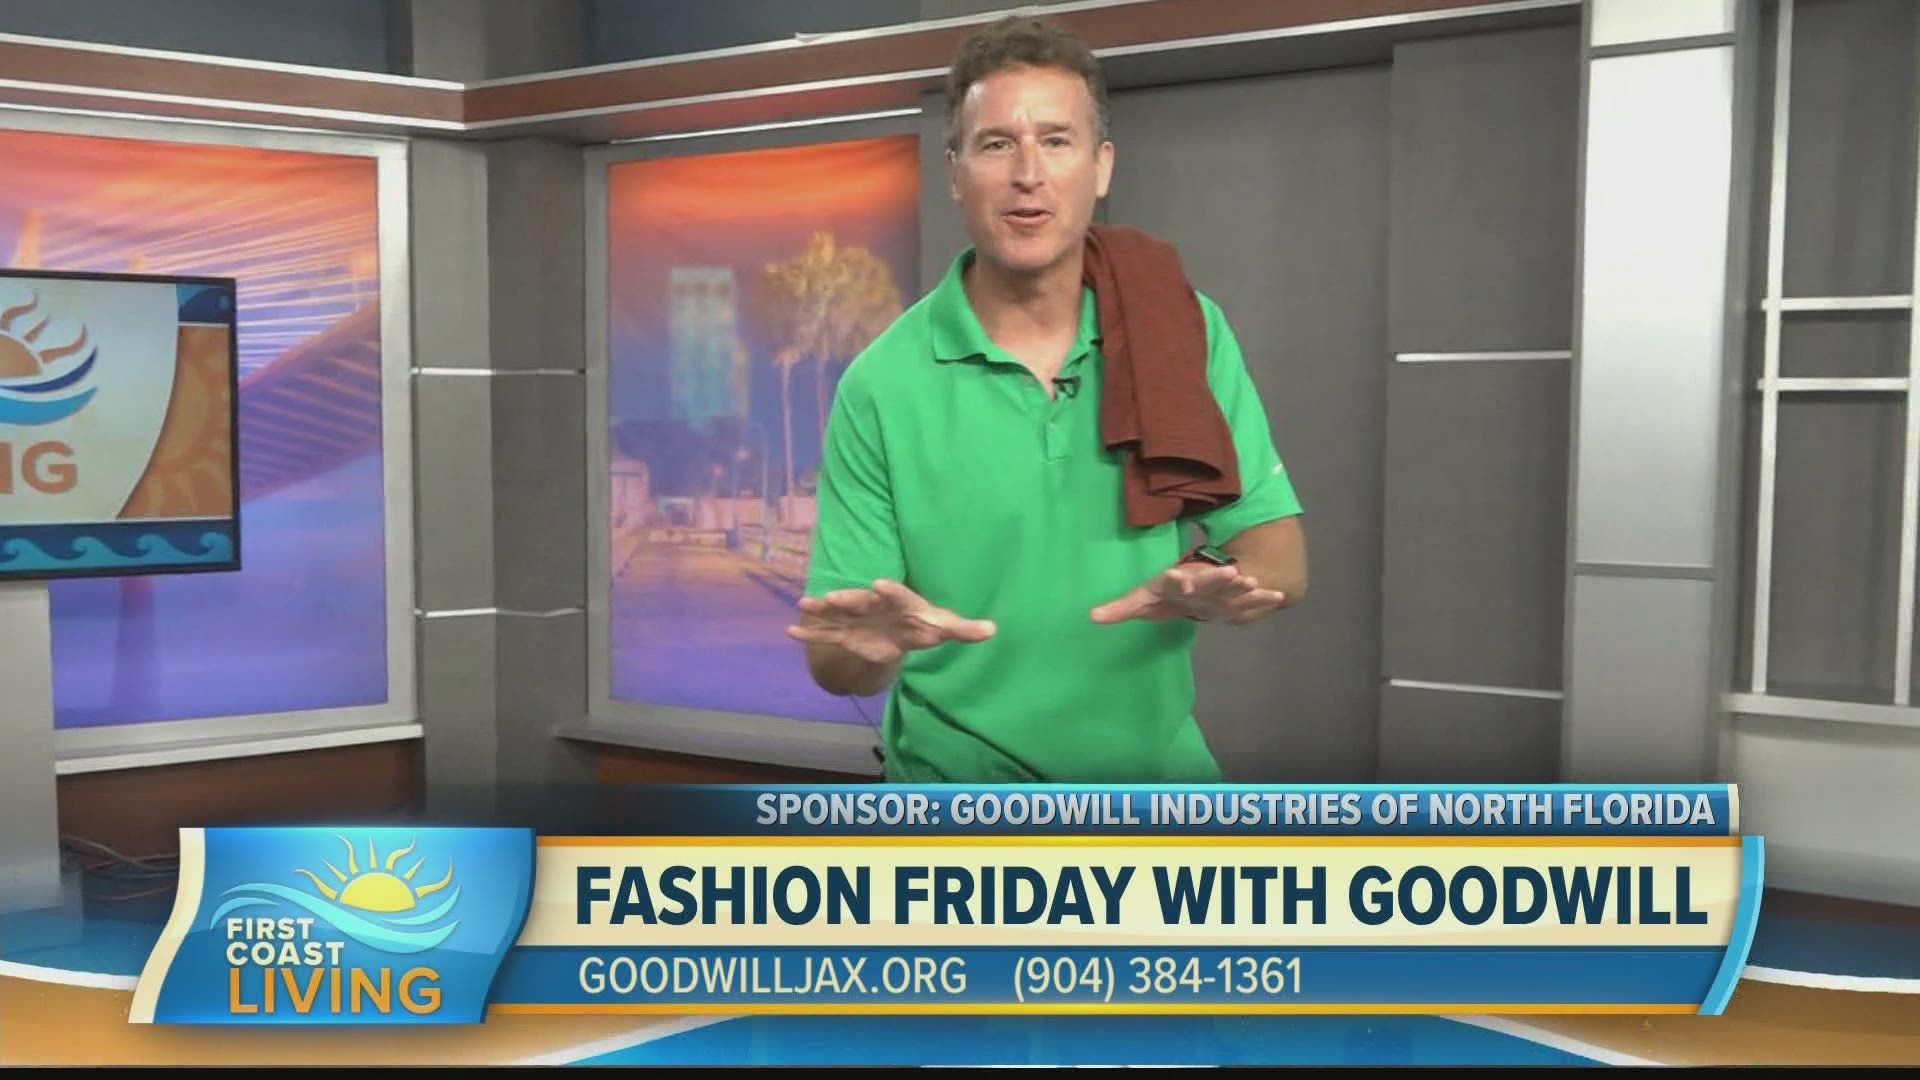 Now that we're back in the studio, Mike gets a chance to share his Goodwill finds. Watch him strut his stuff.